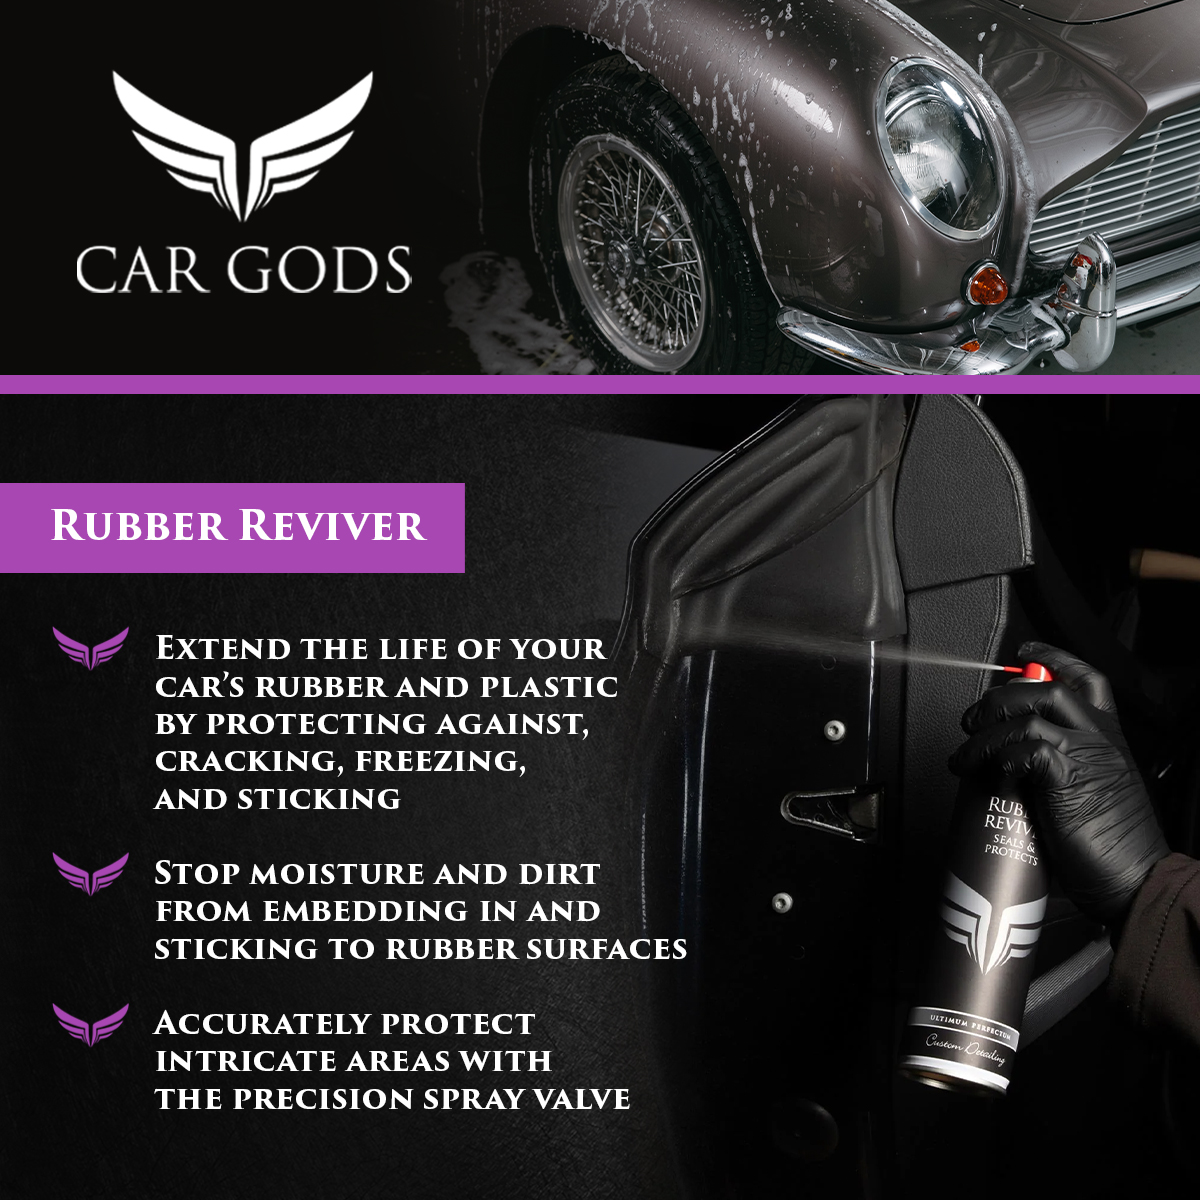 Car Gods Rubber Reviver. Extend the life of your car’s rubber and plastic by protecting against, cracking, freezing, and sticking. Stop moisture and dirt from embedding in and sticking to rubber surfaces and prepare your vehicle’s rubber seals and plastic trim for winter. The precision spray valve helps you accurately protect intricate areas of your vehicle.